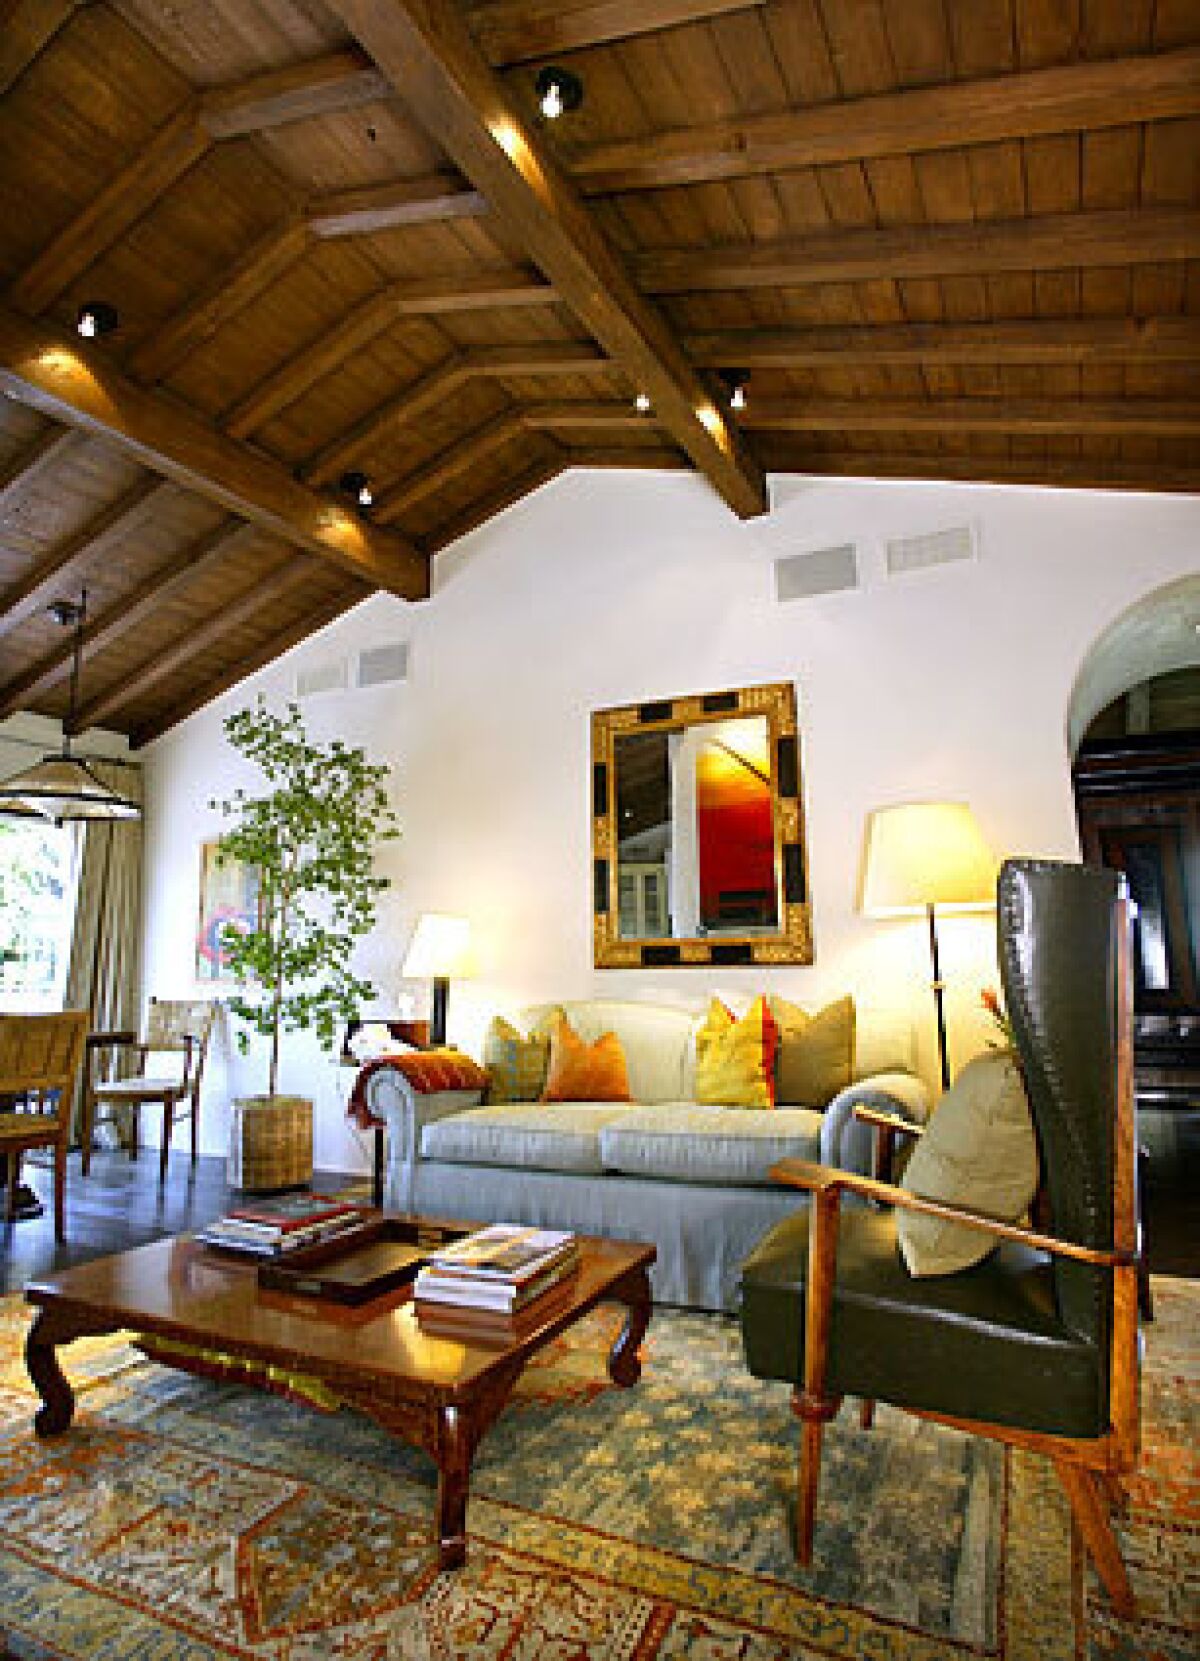 Acting couple Ben Affleck and Jennifer Garner are the latest owners of a California ranch house in the Pacific Palisades that has been capturing the imagination of A-listers since Gregory Peck bought it in 1947. This is the den in the 8,800-square-foot home they bought from producer Grazer for $17.55 million, according to public records.